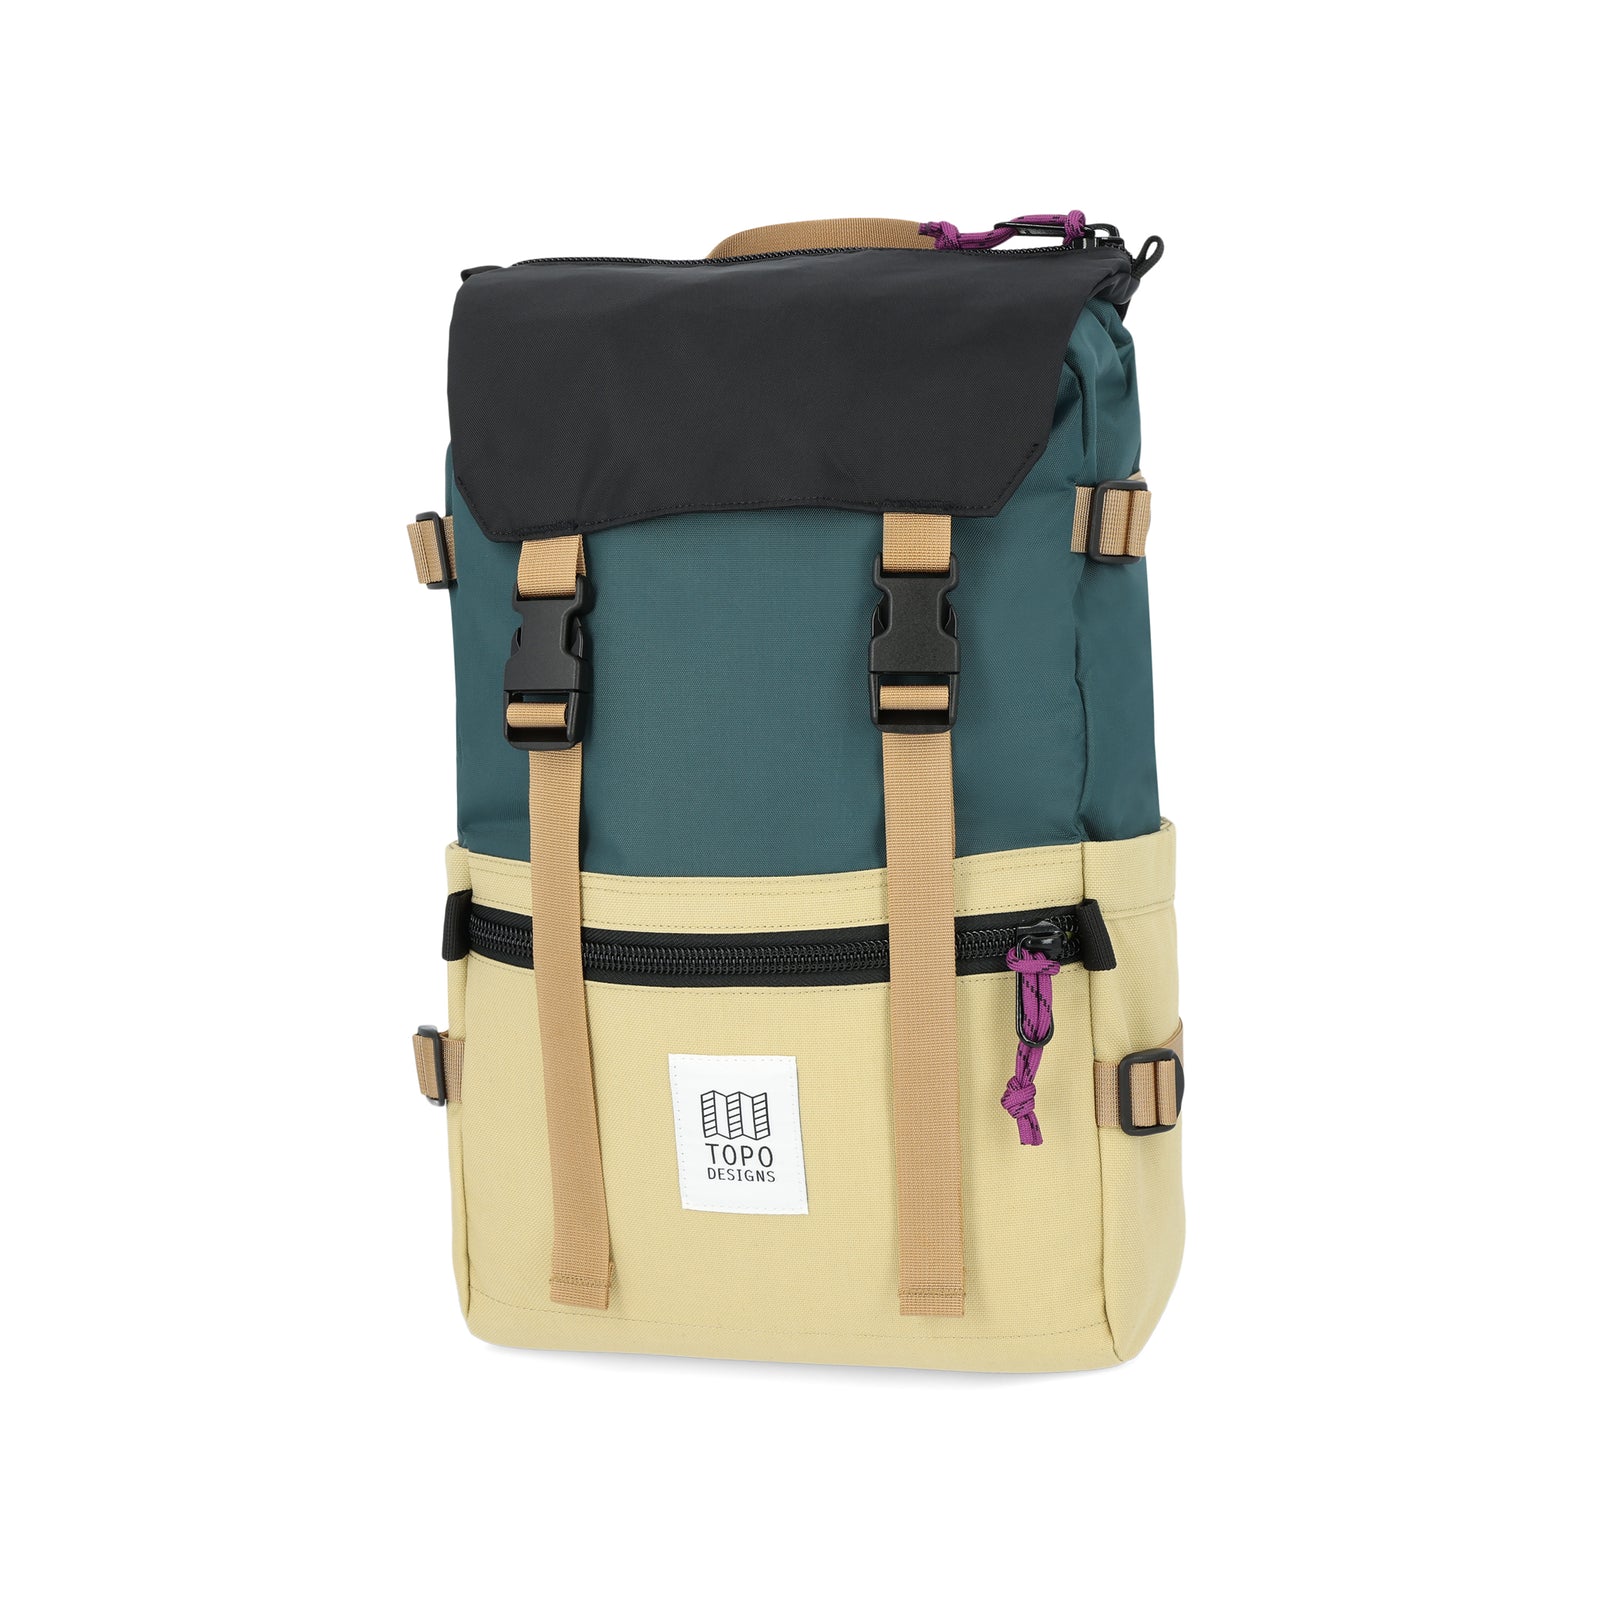 Topo Designs Rover Pack Classic laptop backpack in "Hemp / Botanic Green".